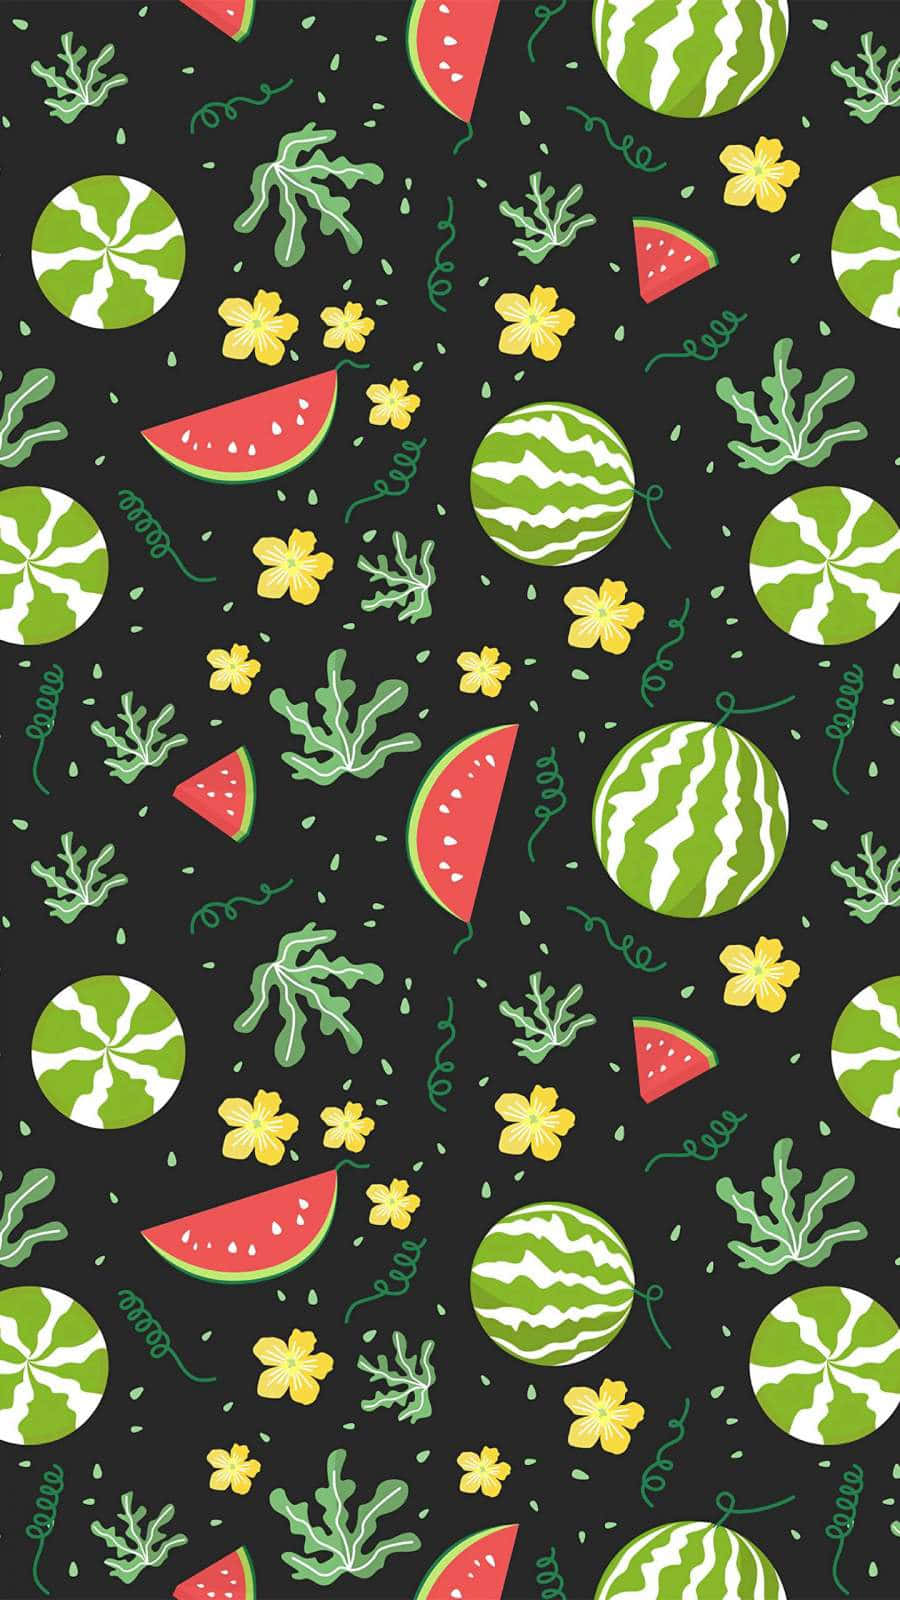 A Black And White Pattern With Watermelon And Other Fruits Wallpaper